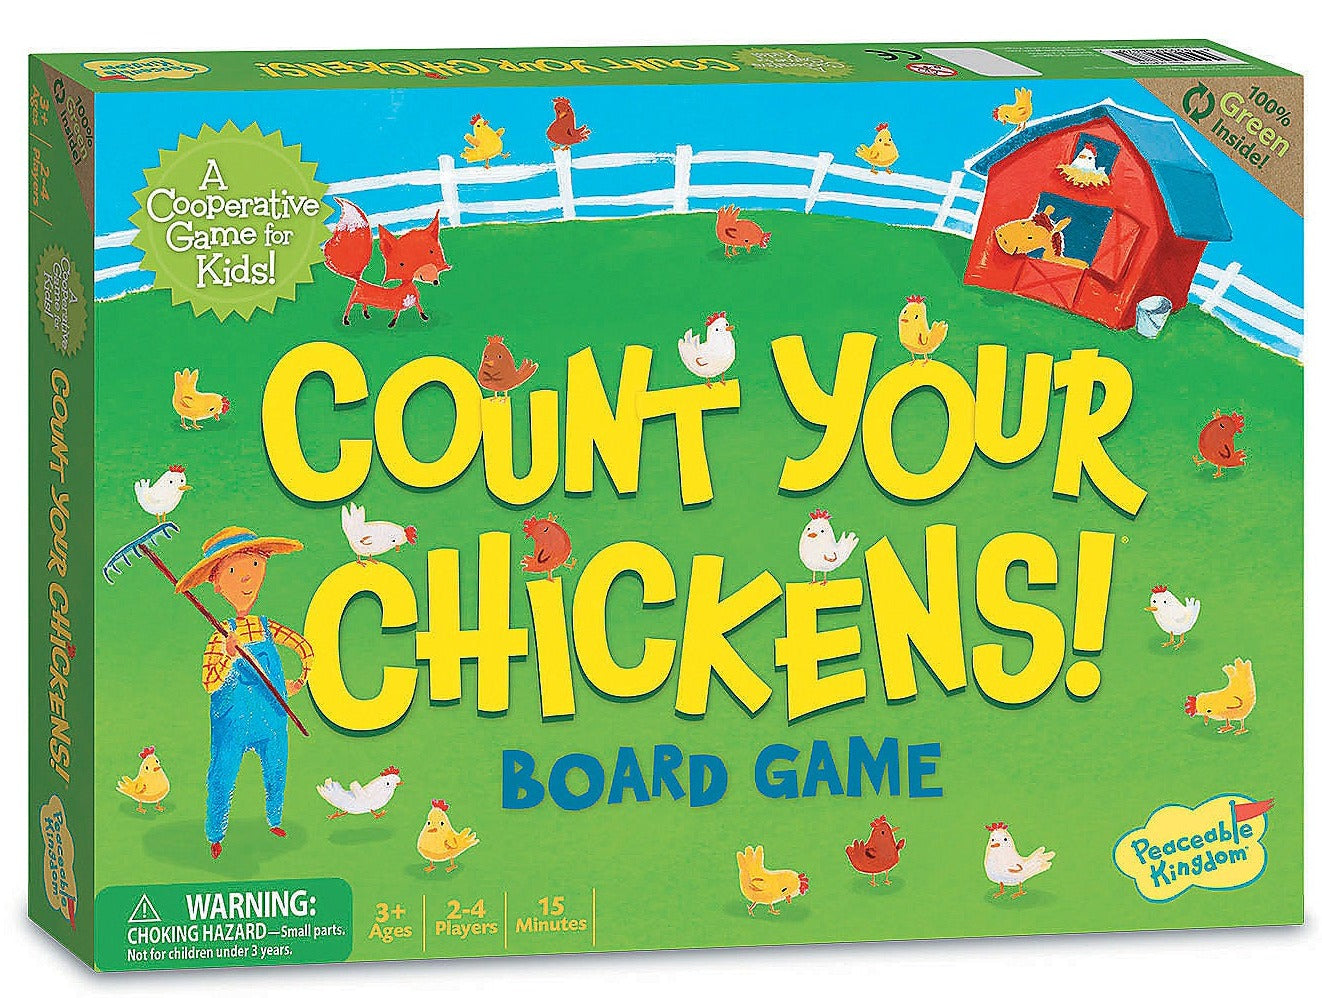 Count Your Chickens Game